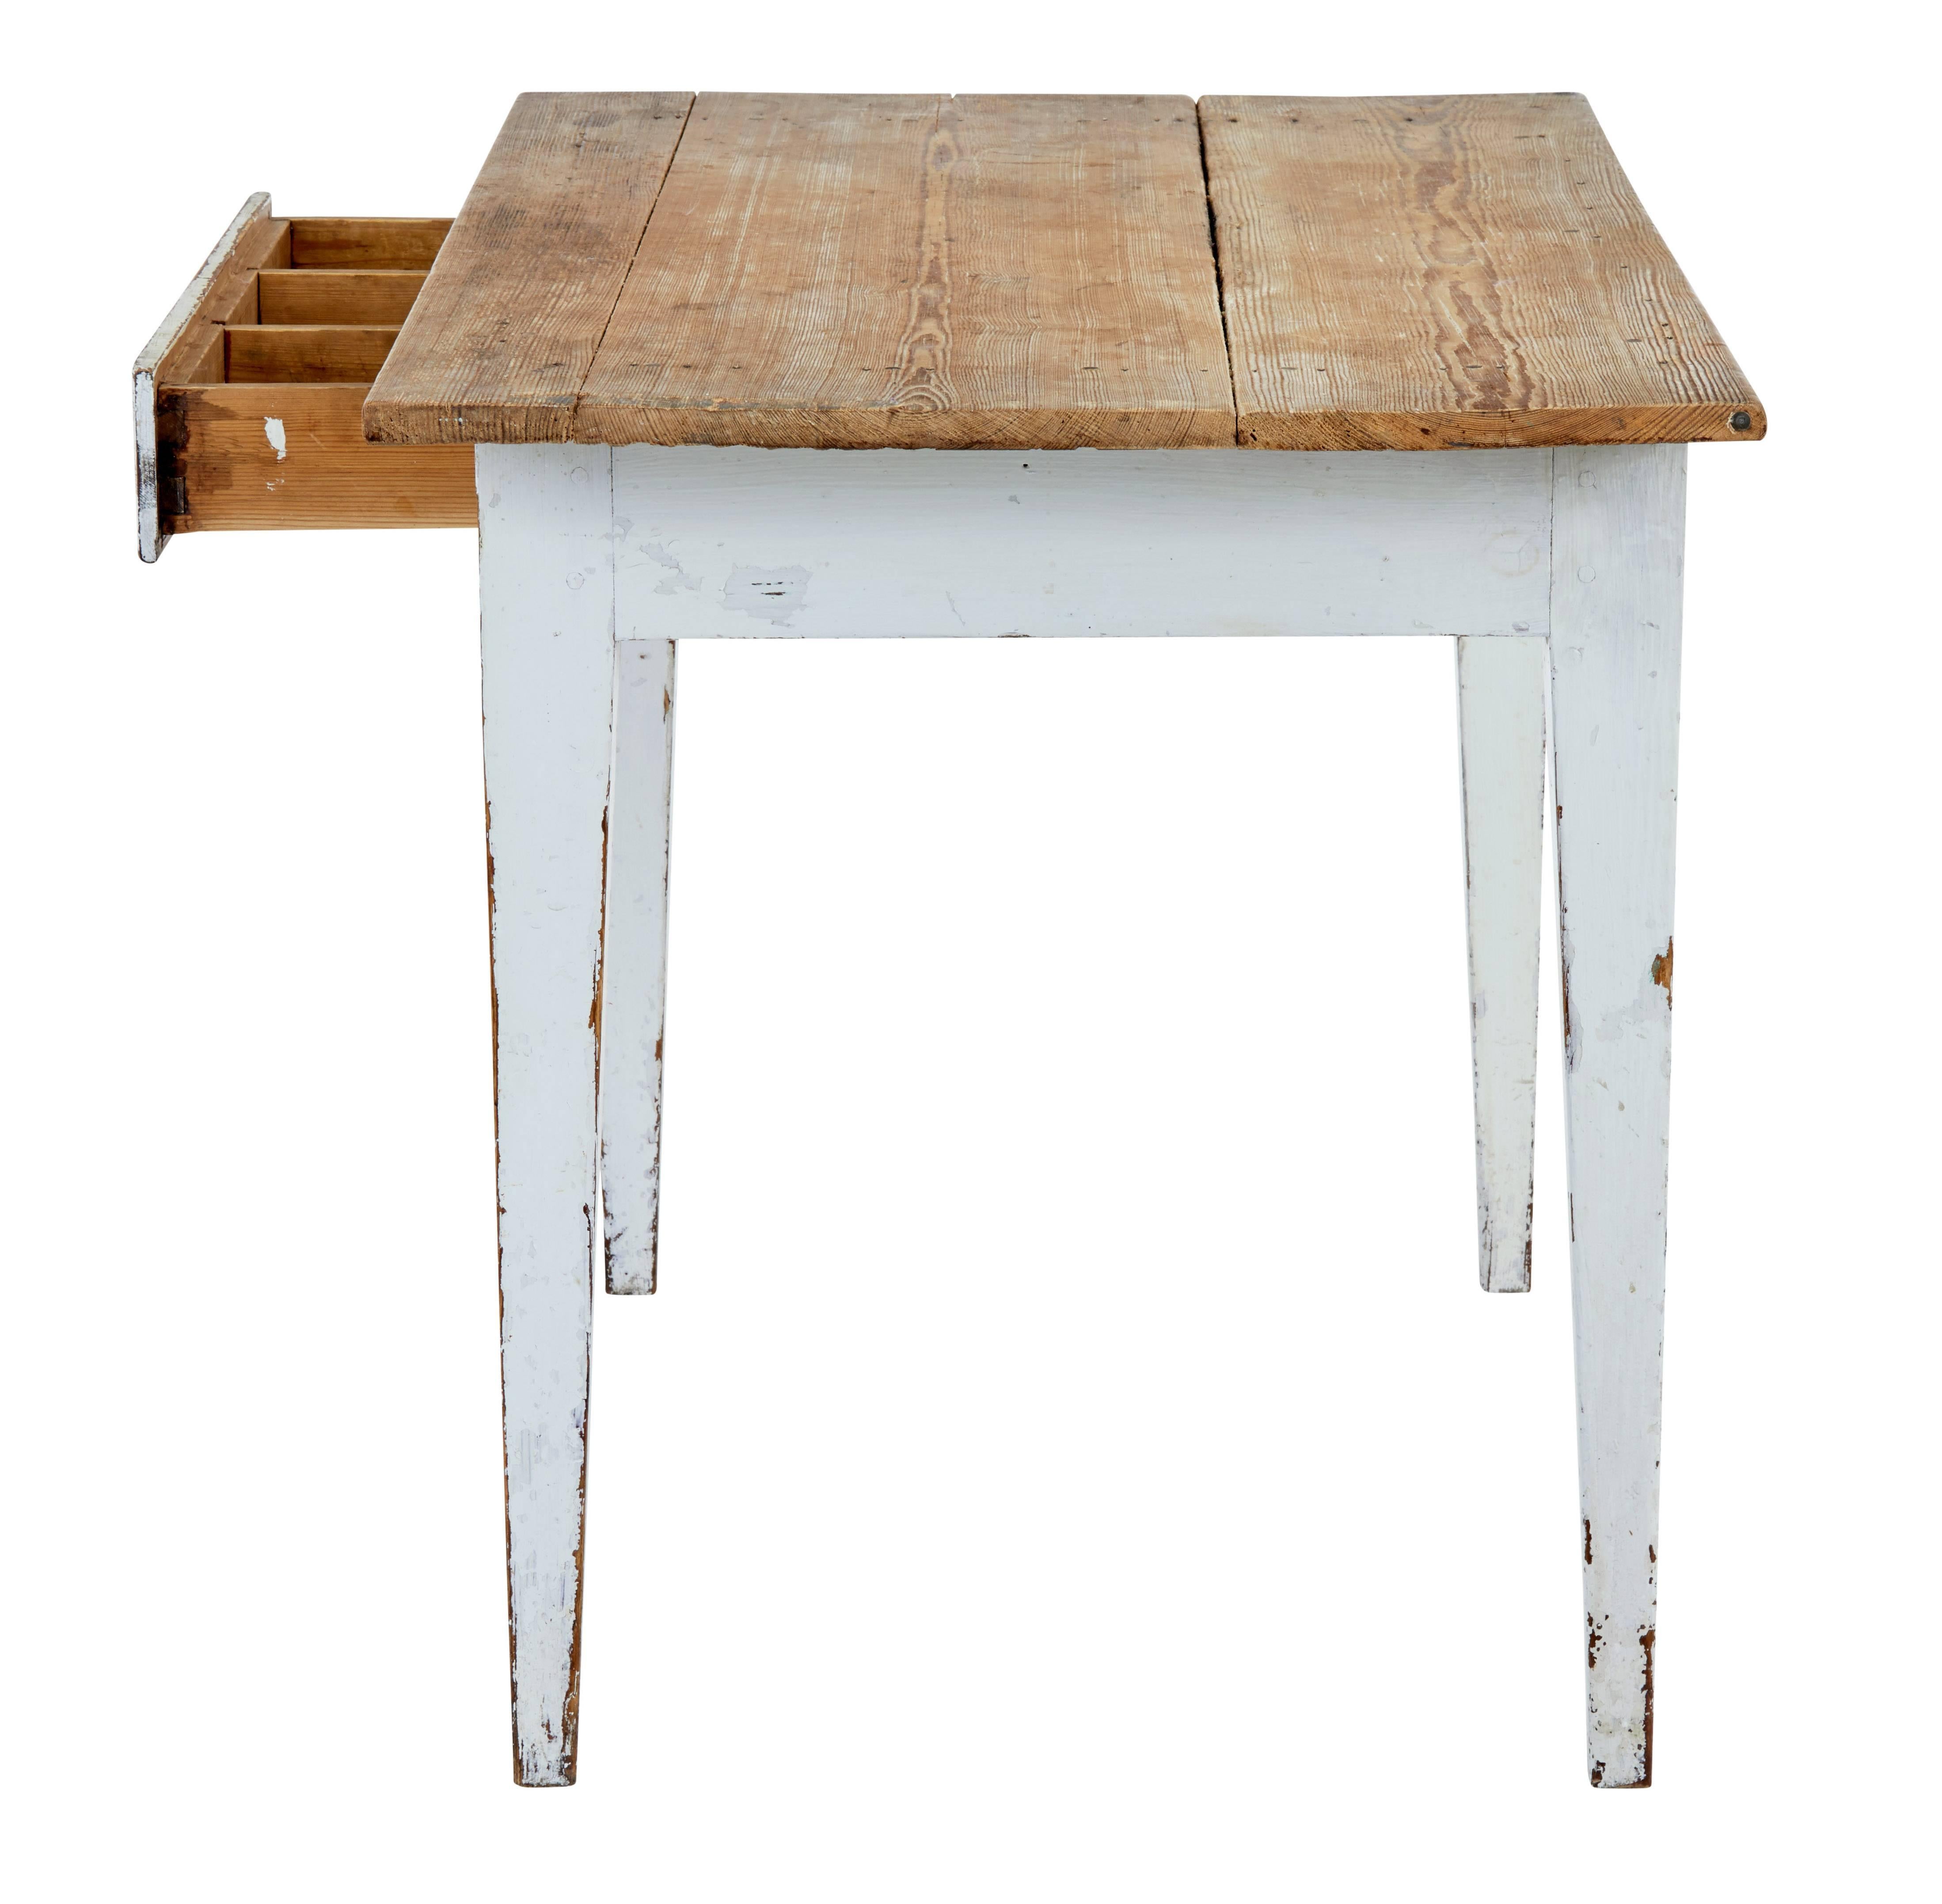 Rustic Swedish kitchen table, circa 1880.

With the Swedish being renowned for their elegant furniture they are also known for their practical and rustic furniture.

Scrubbed pine three-piece top with painted base and a single drawer for